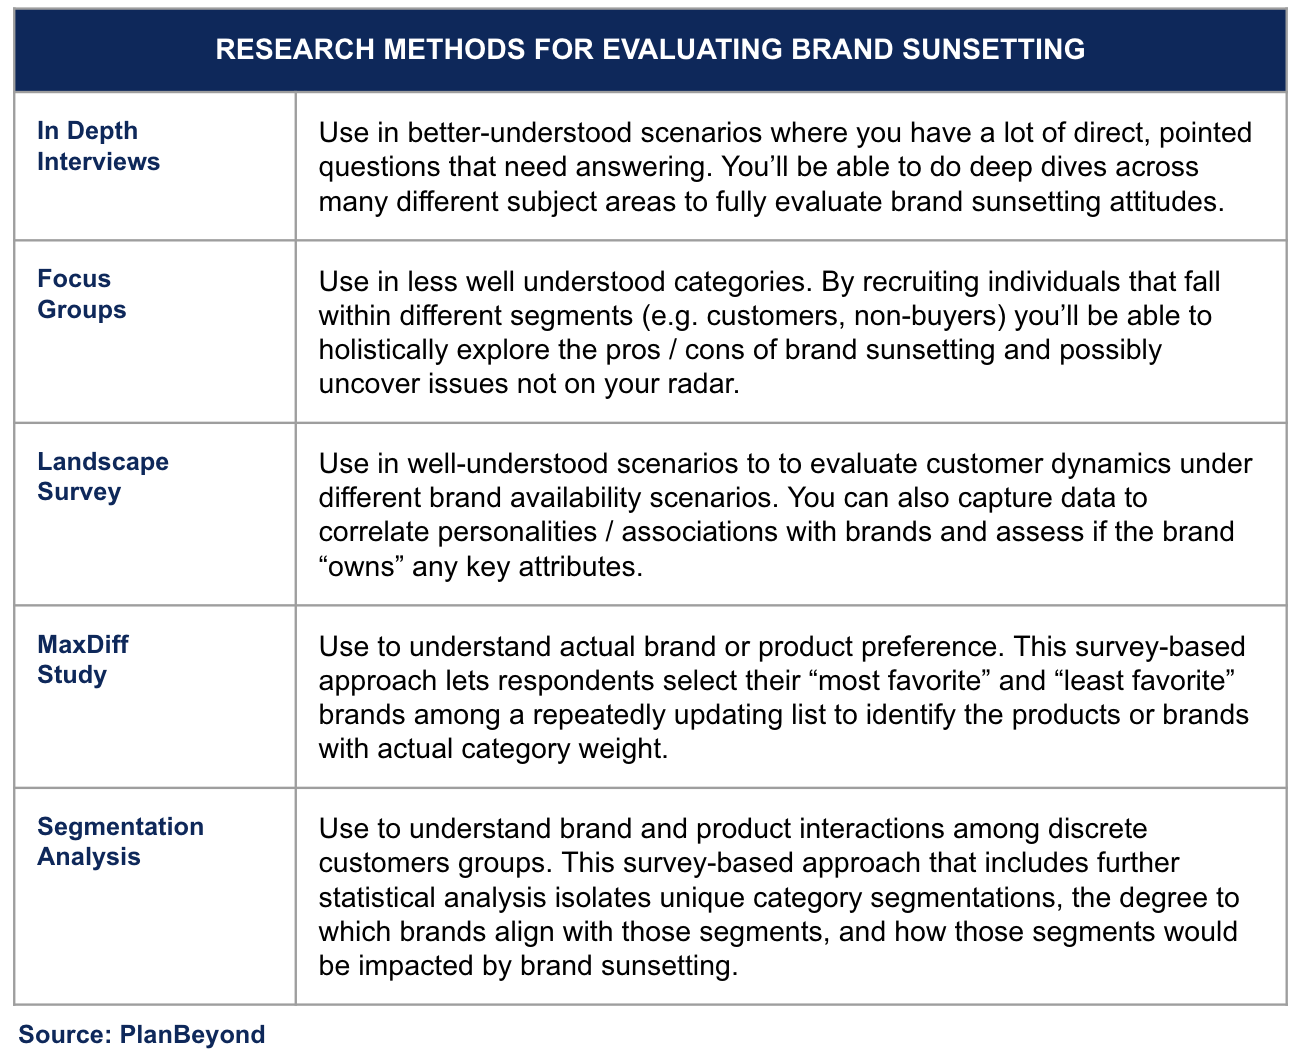 Research Methods To Evaluate How To Sunset A Brand